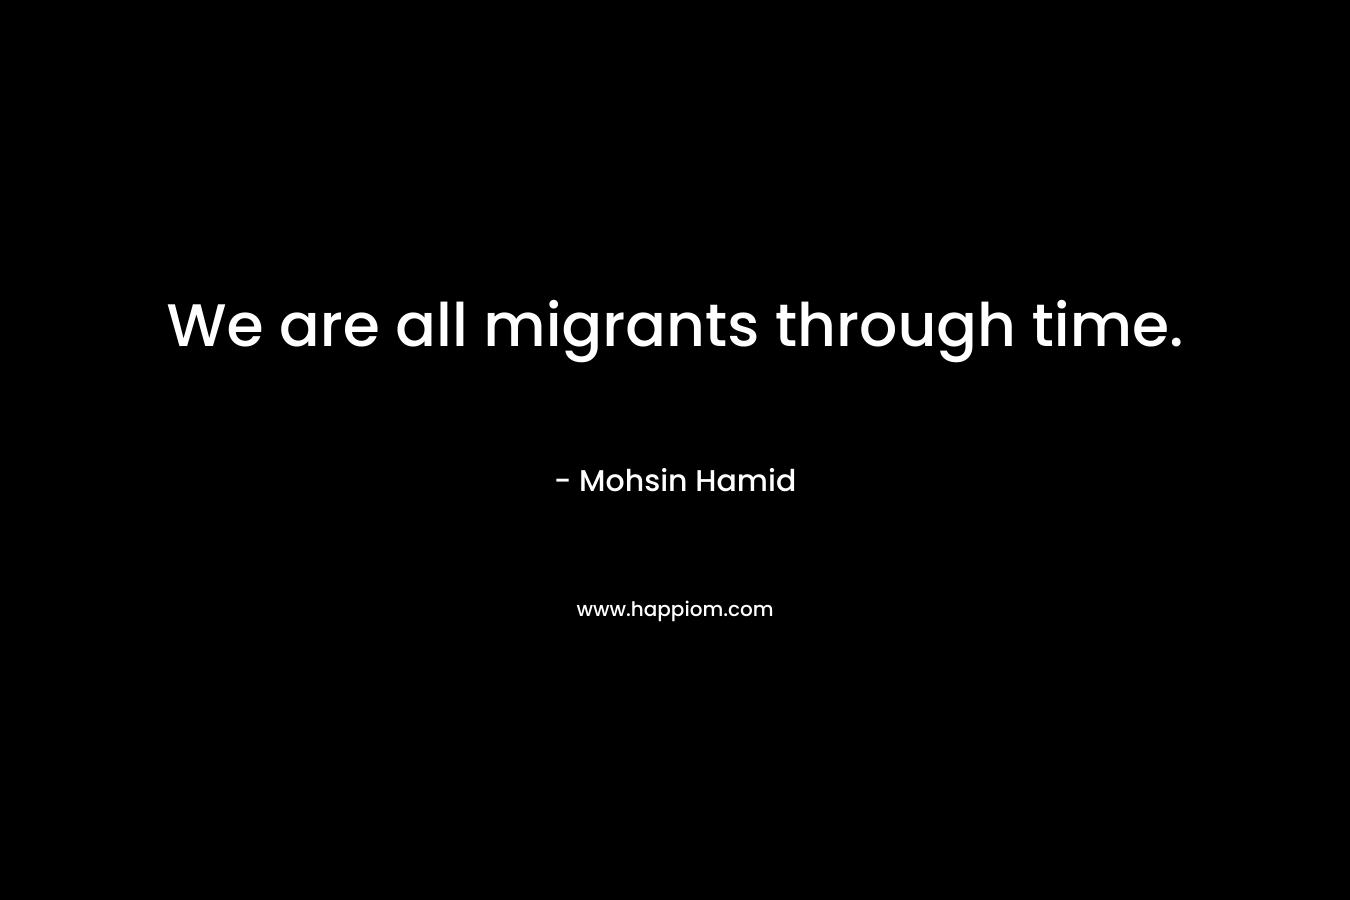 We are all migrants through time.